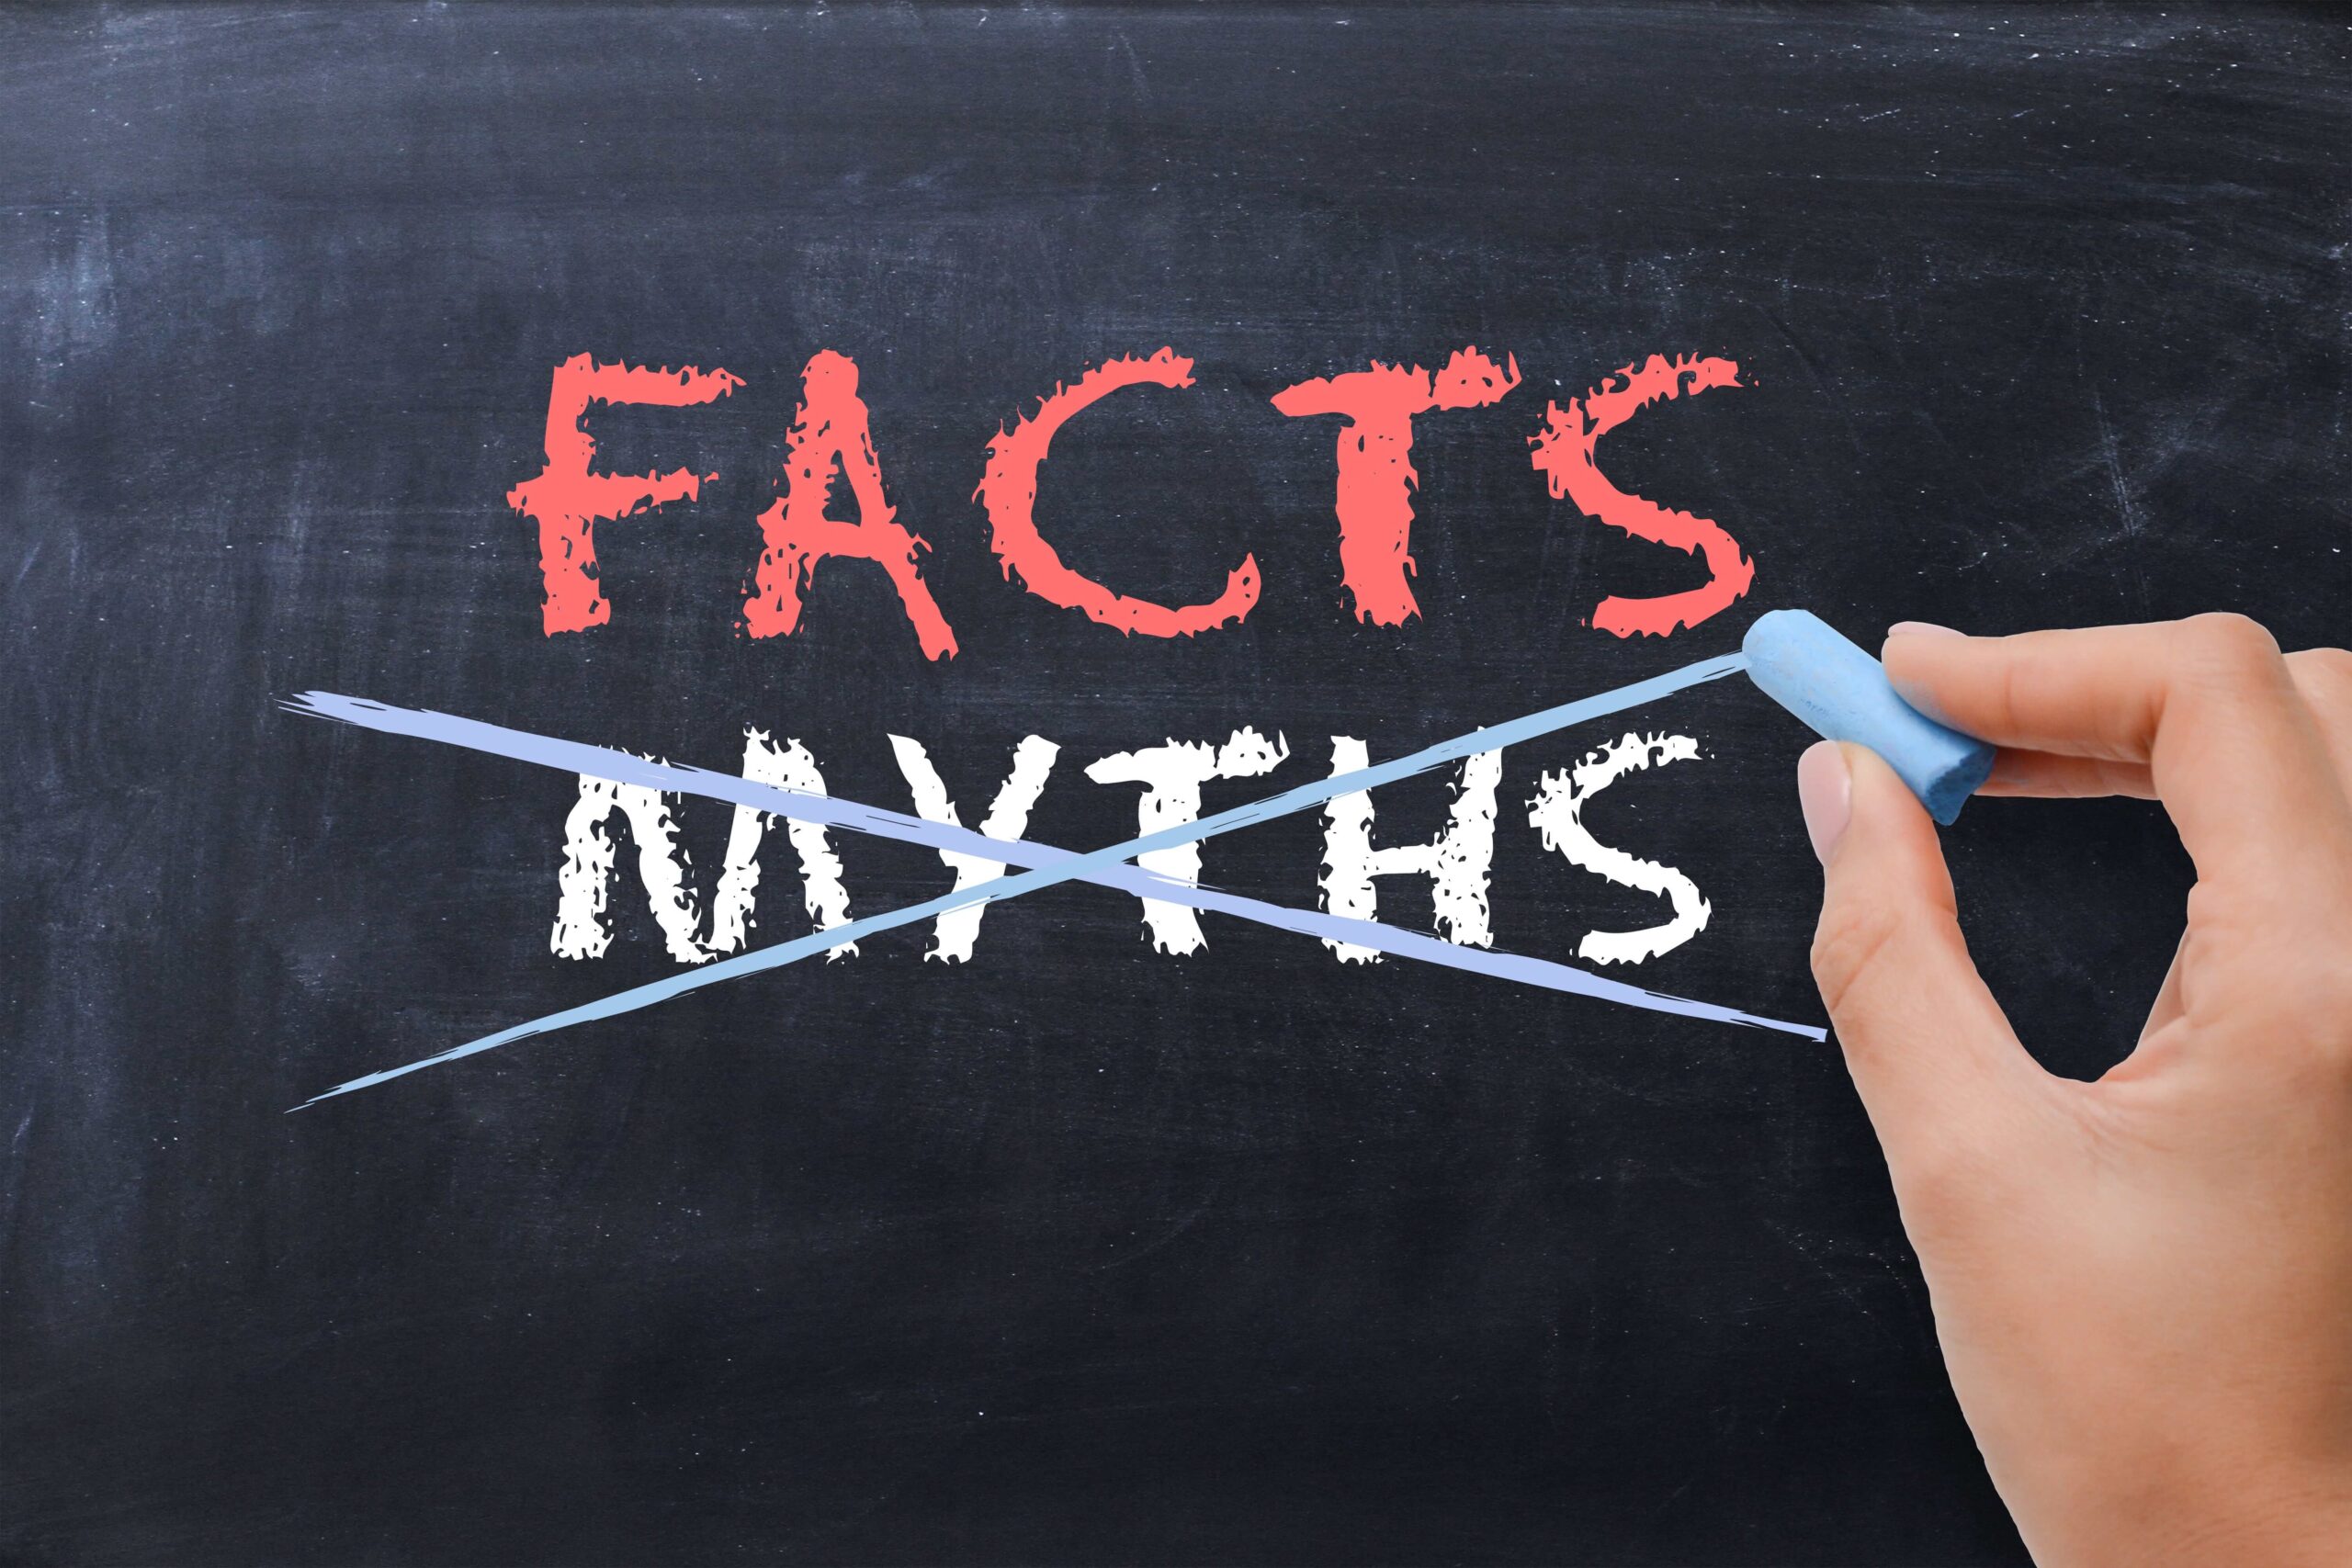 myths and facts written on blackboard